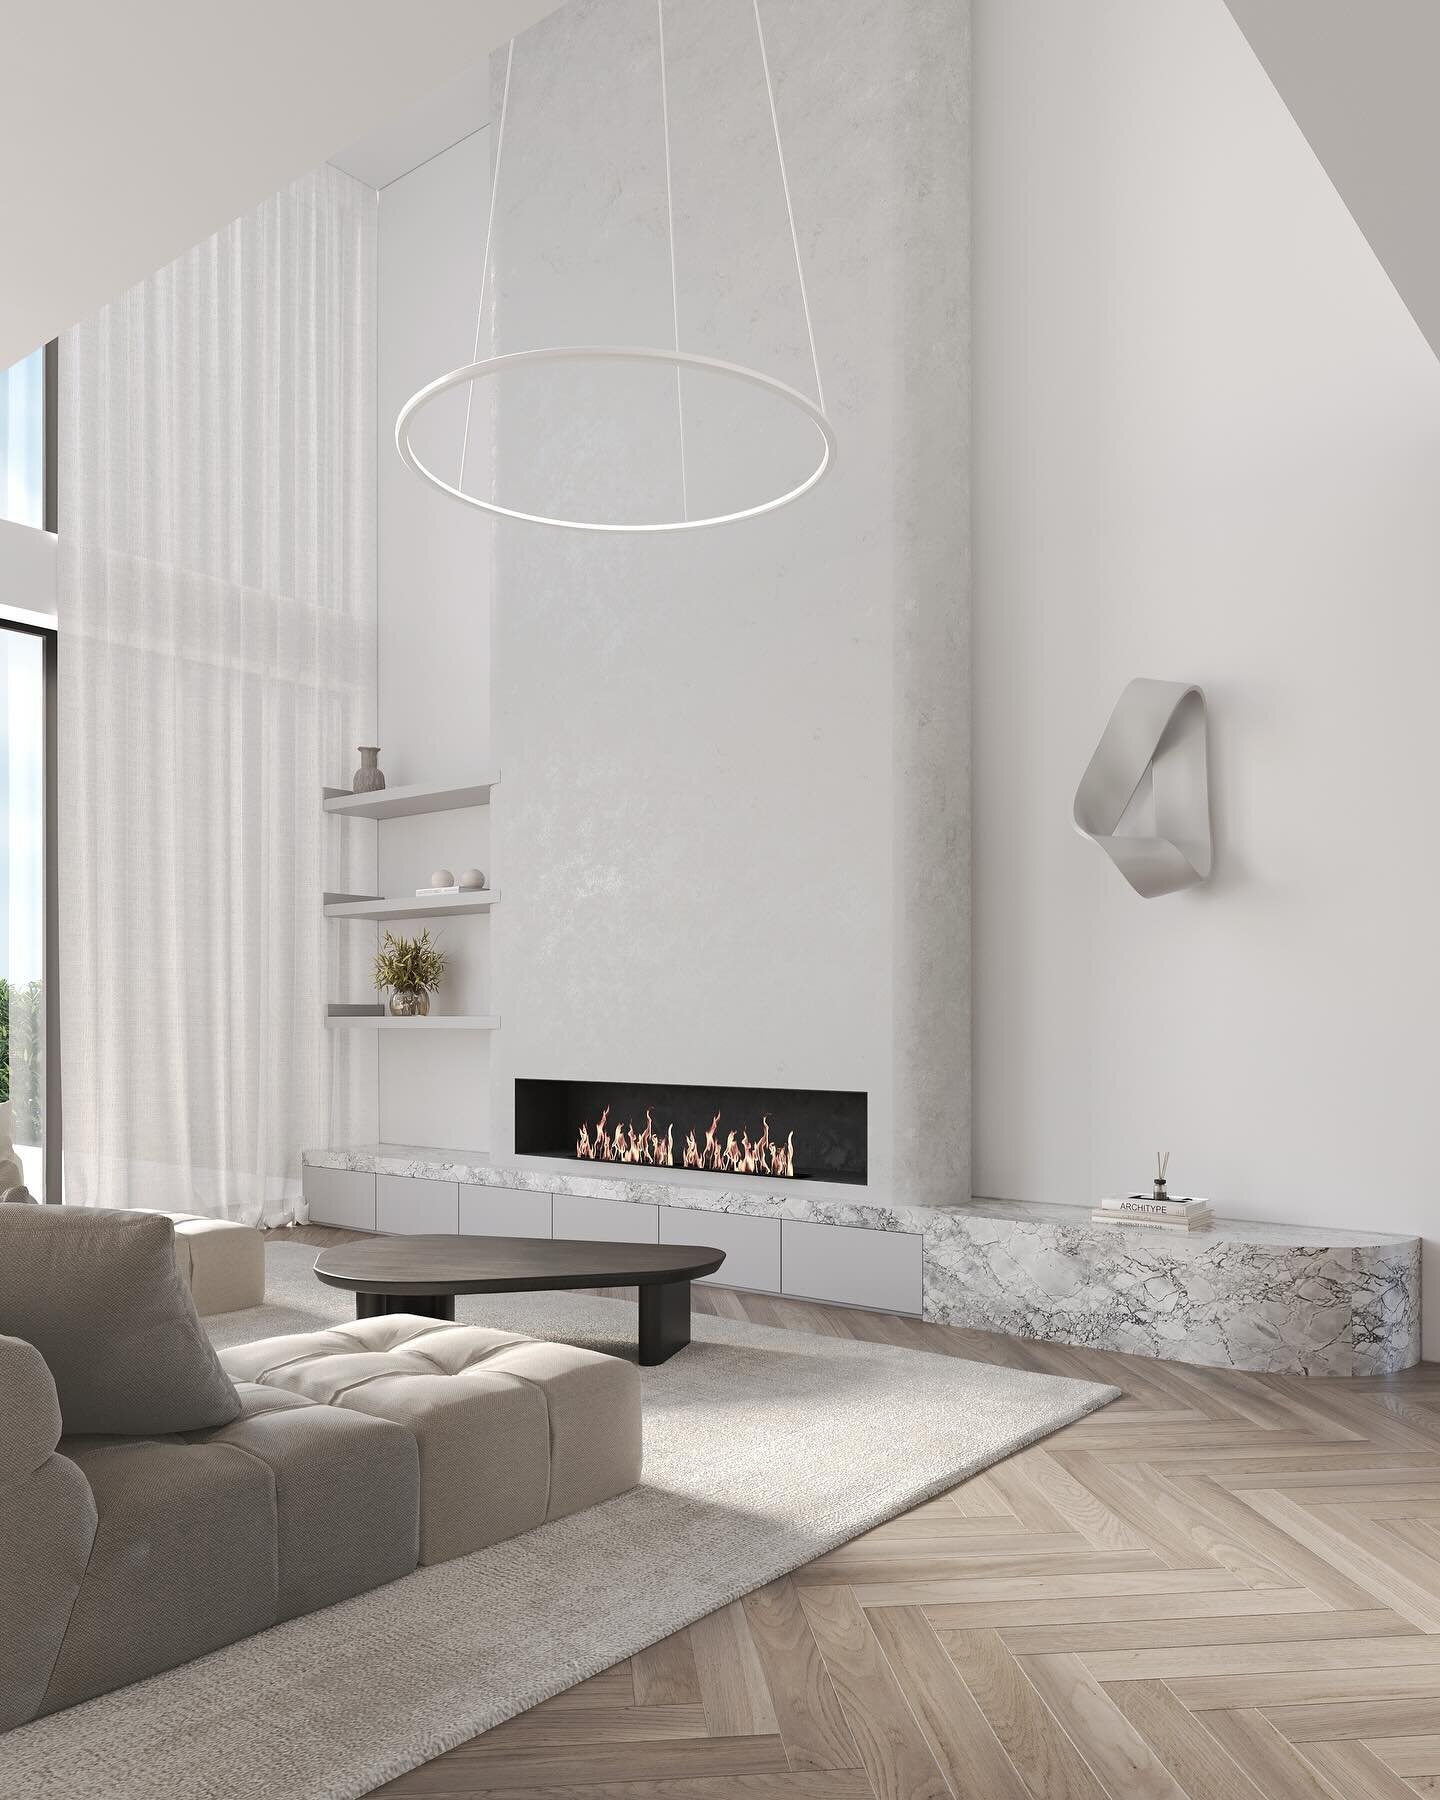 Introducing &mdash;Luna Residence&mdash; 

Double height ceilings, soft palette, curved features, and a central fireplace featuring venetian plaster and a marble bench. 

Luxury and sophistication meet in this elegant space. 

Interior design @nazdes